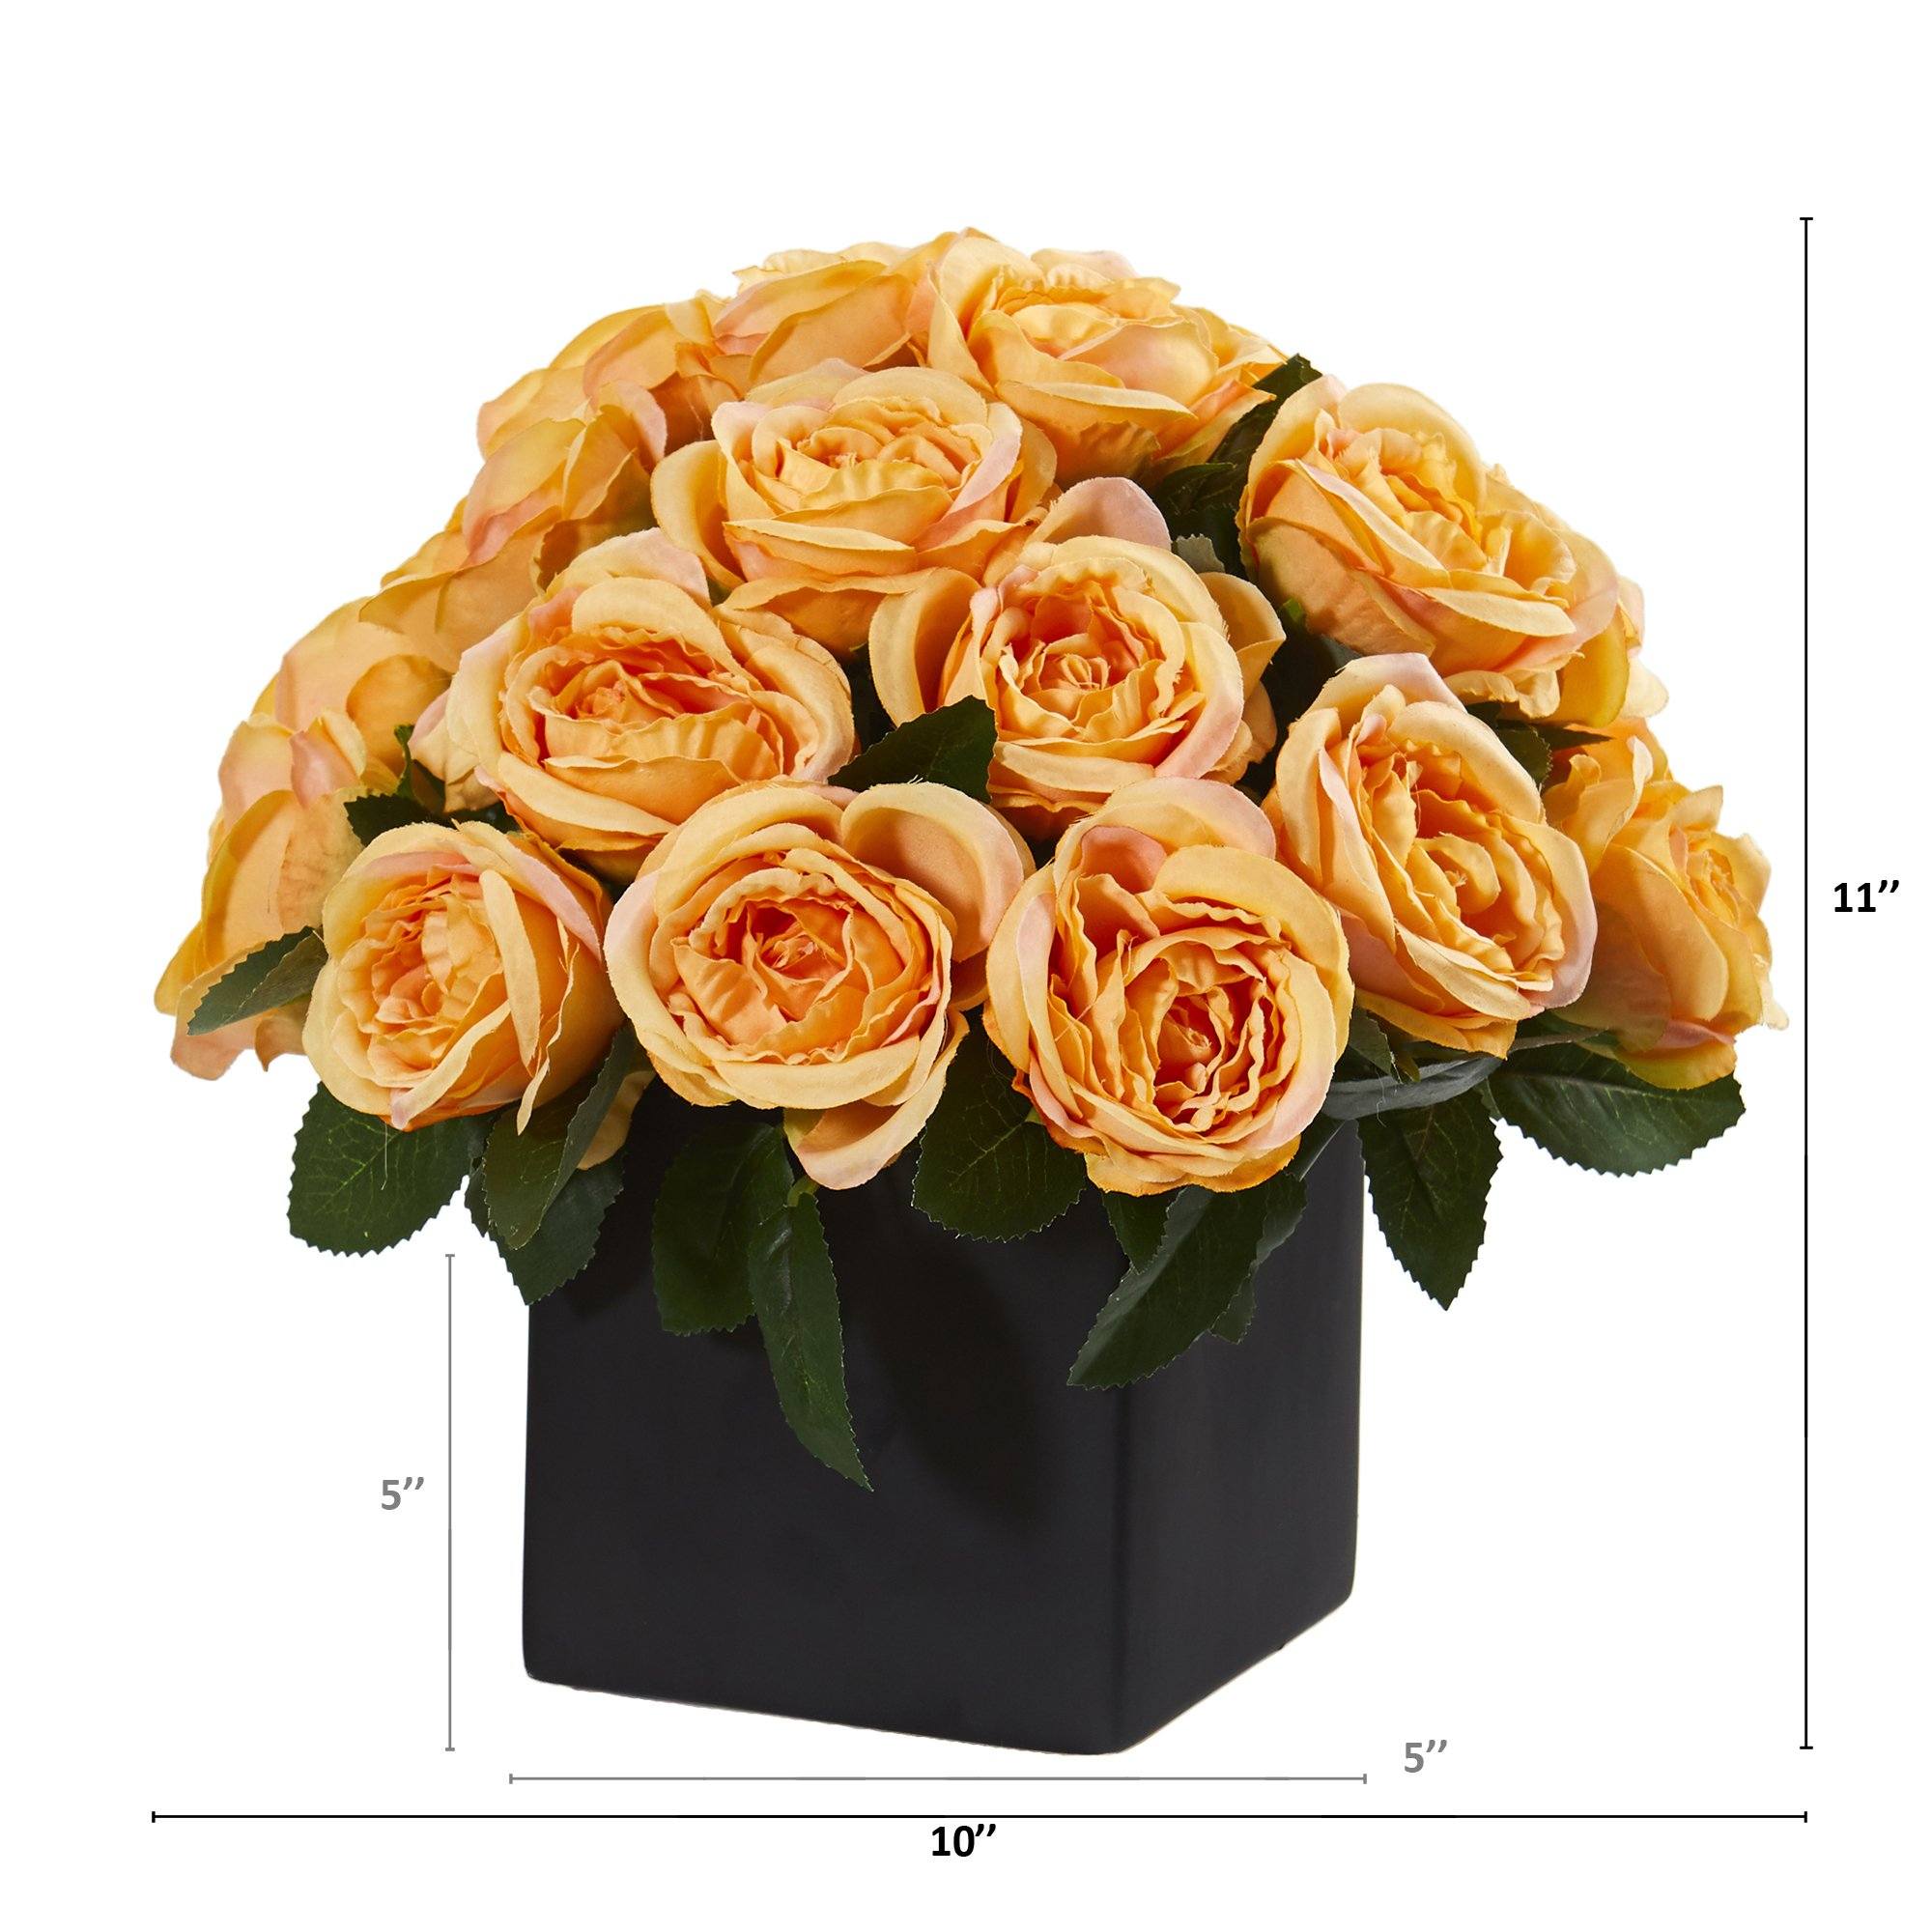 Artificial Arrangement - 11” Rose in Black Vase by Nearly Natural